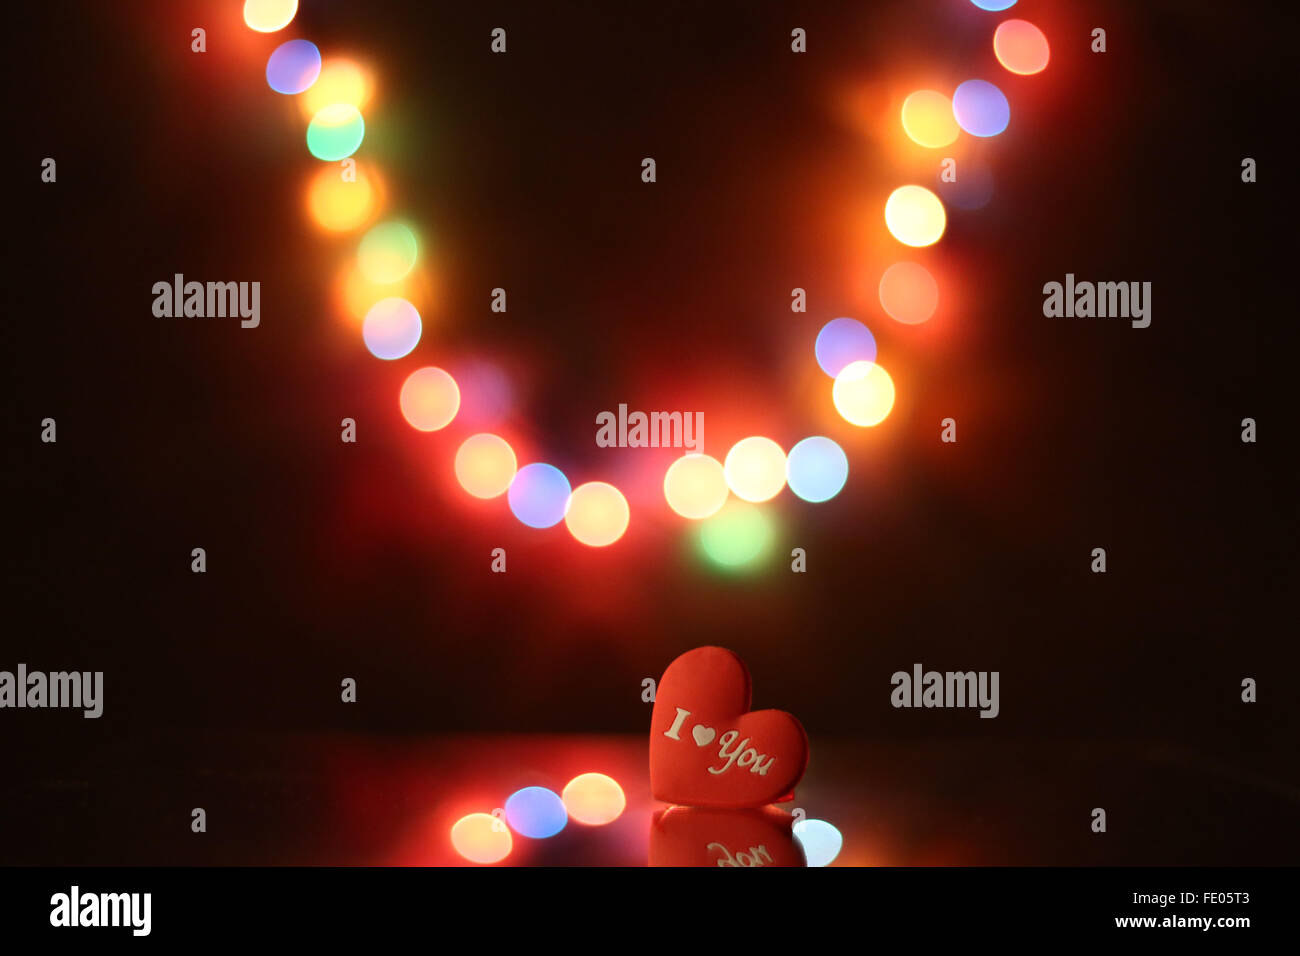 valentine holiday greeting card with red heart and blurry lights Stock Photo